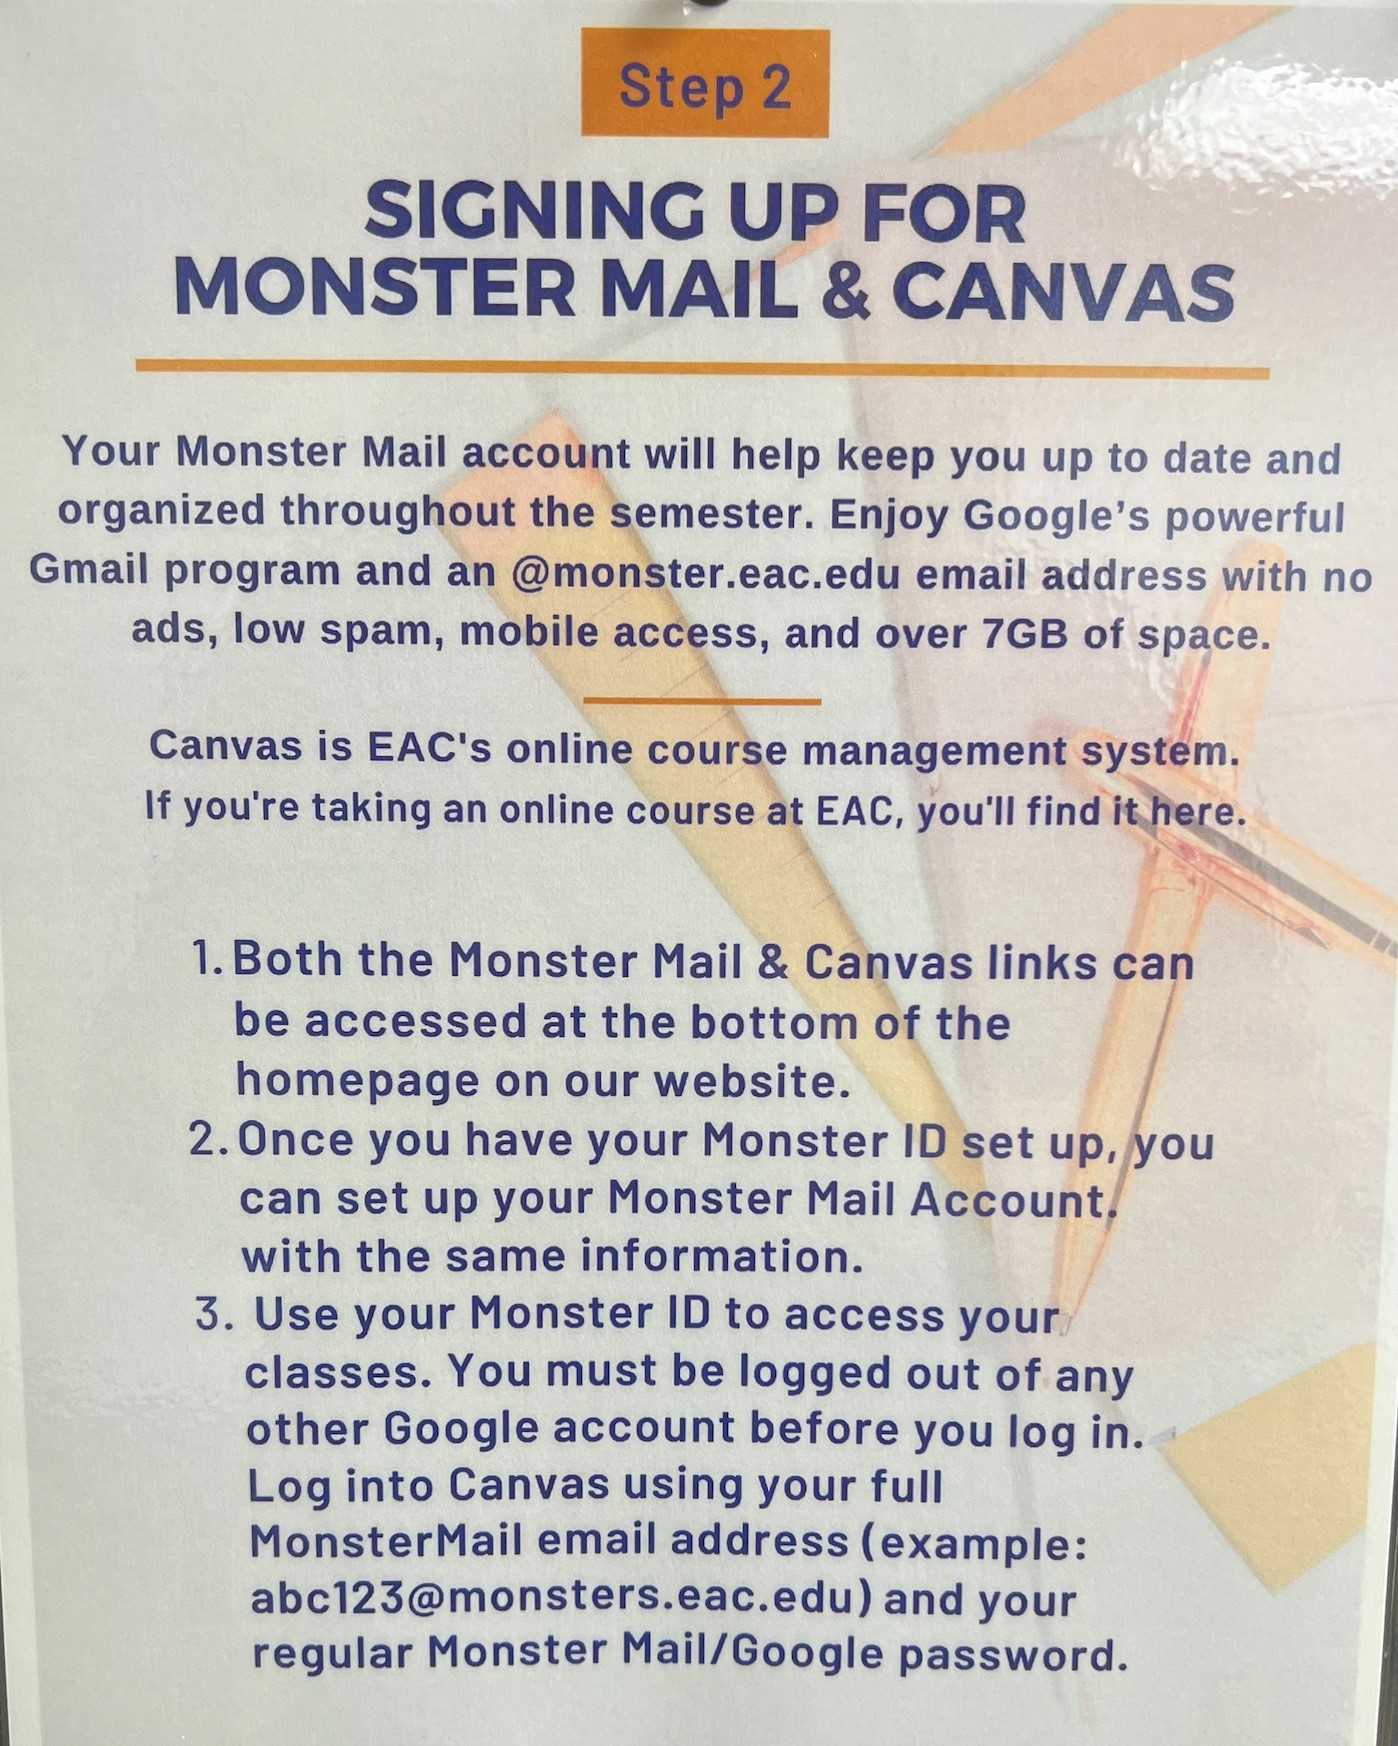 Instructions for logging on to Monster Mail